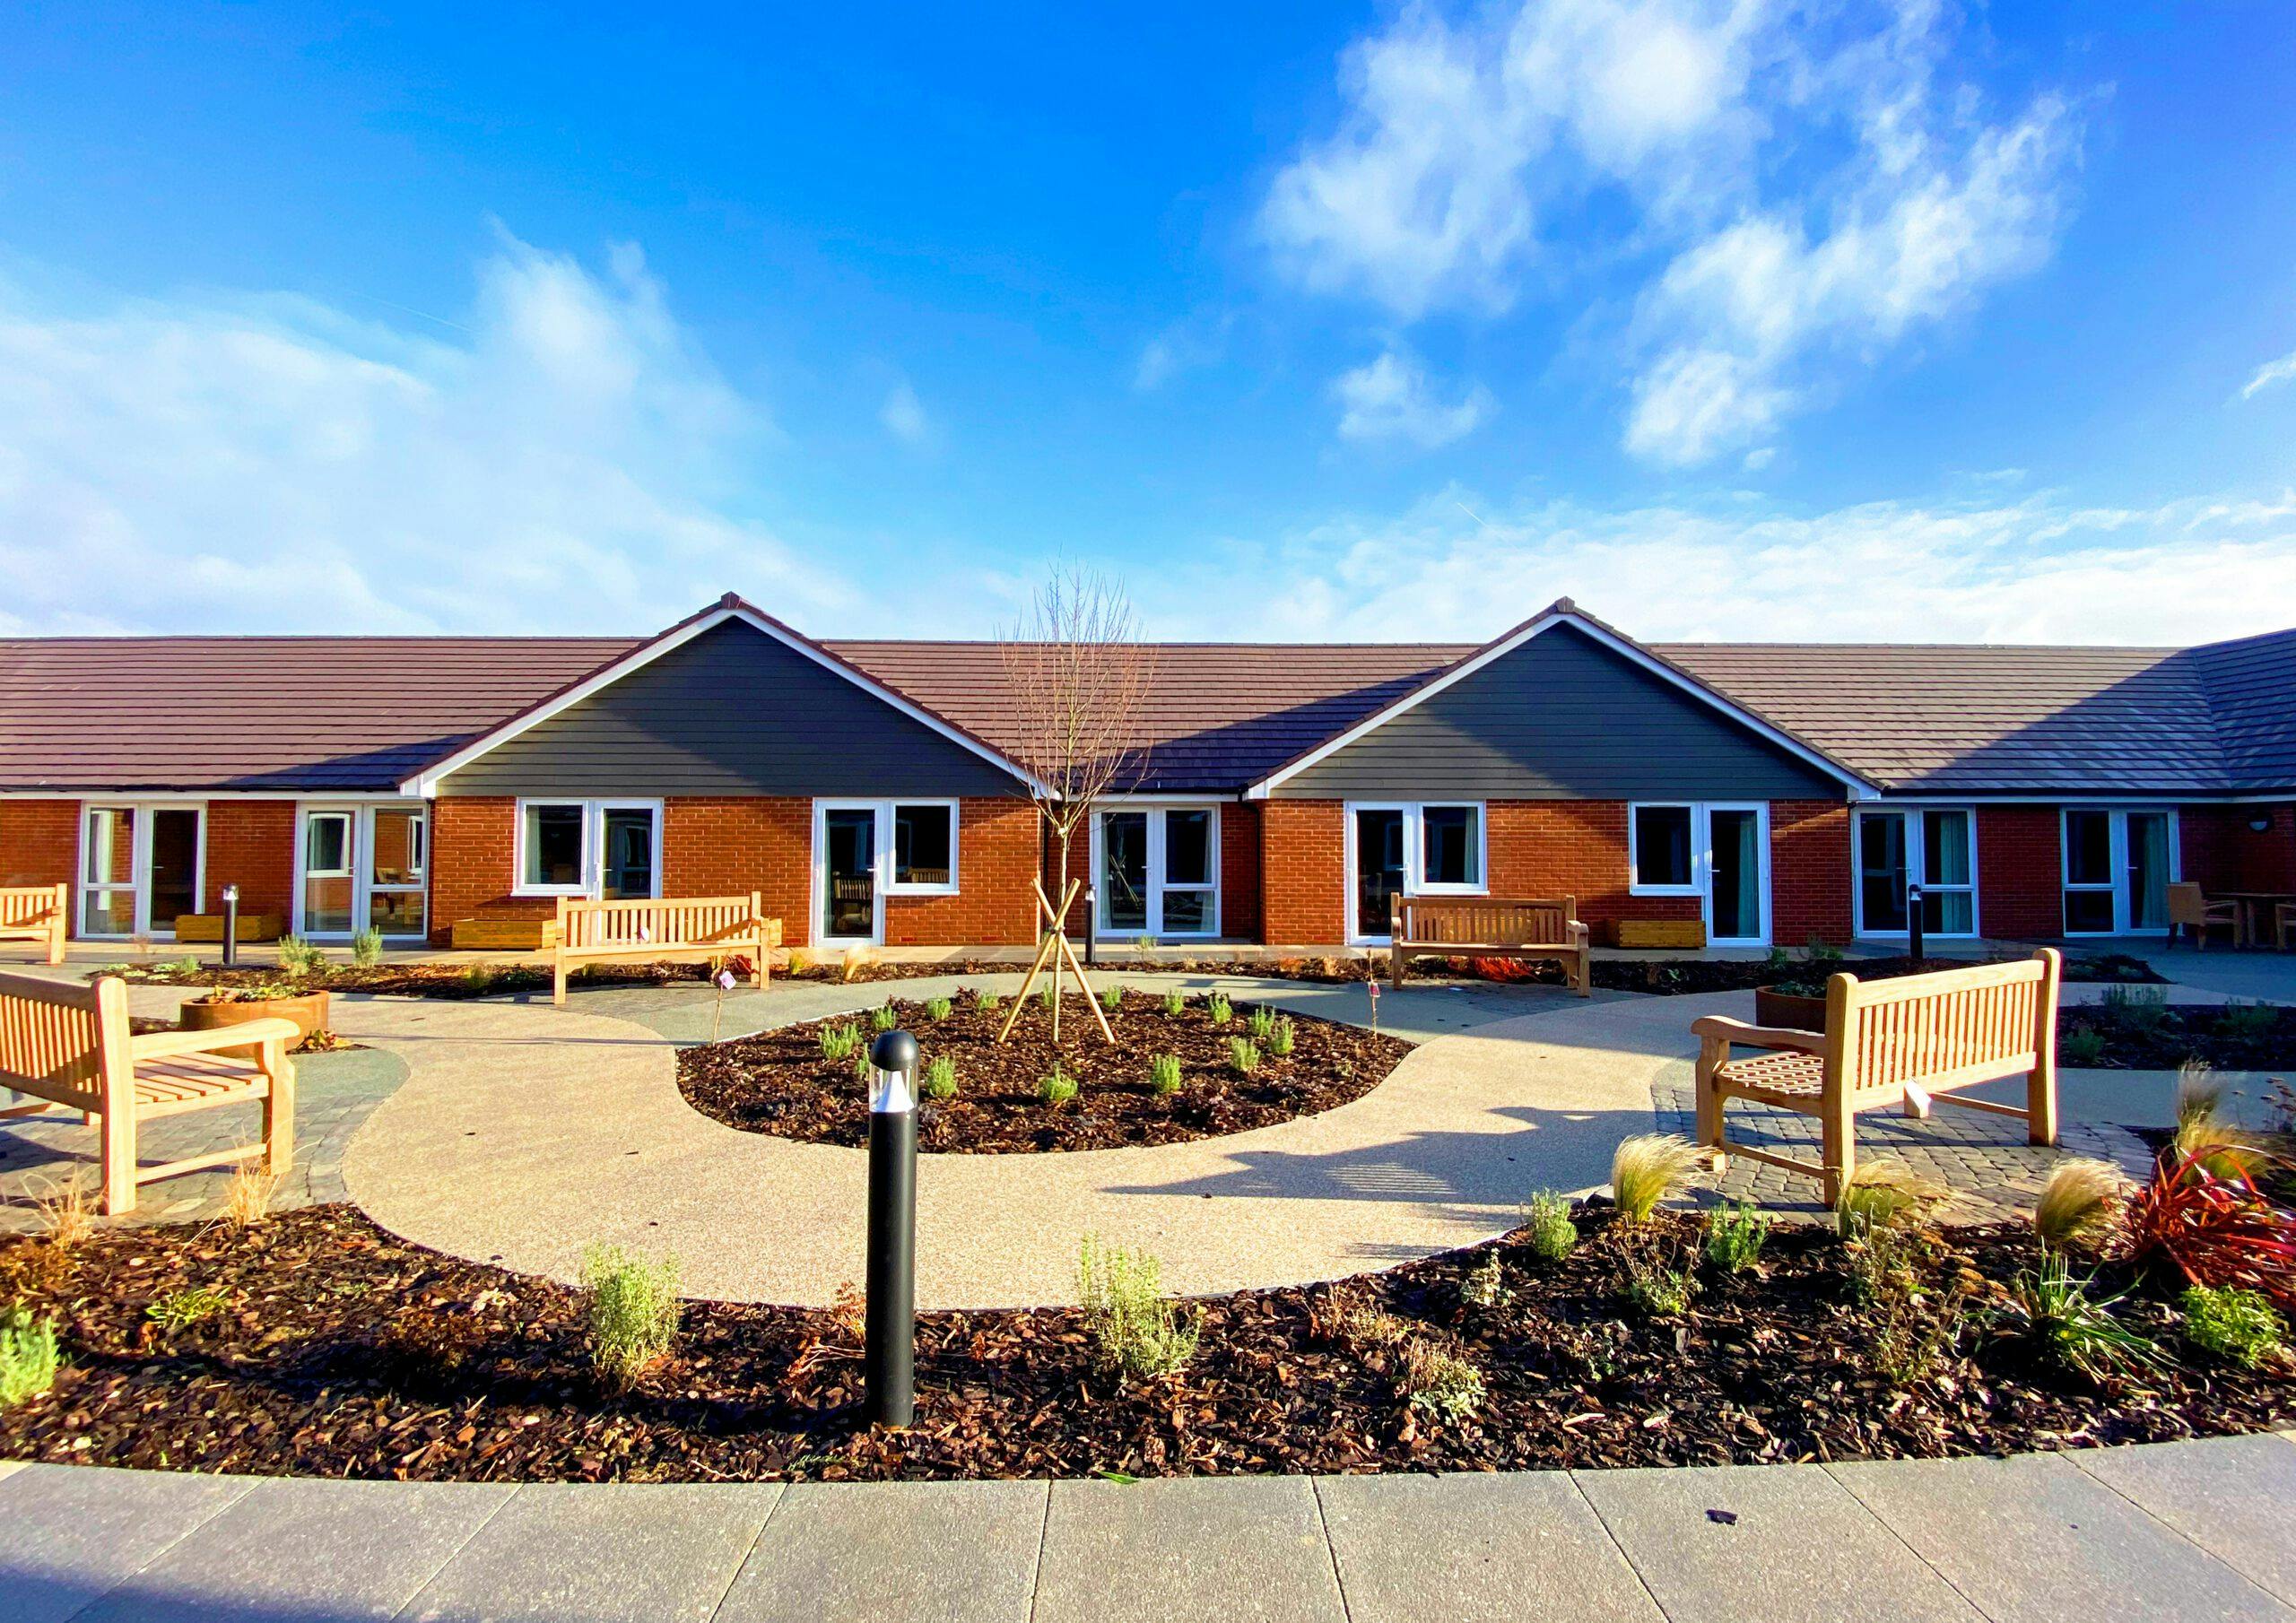 Exterior of Thimbleby Court care home in Horncastle, Lincolnshire